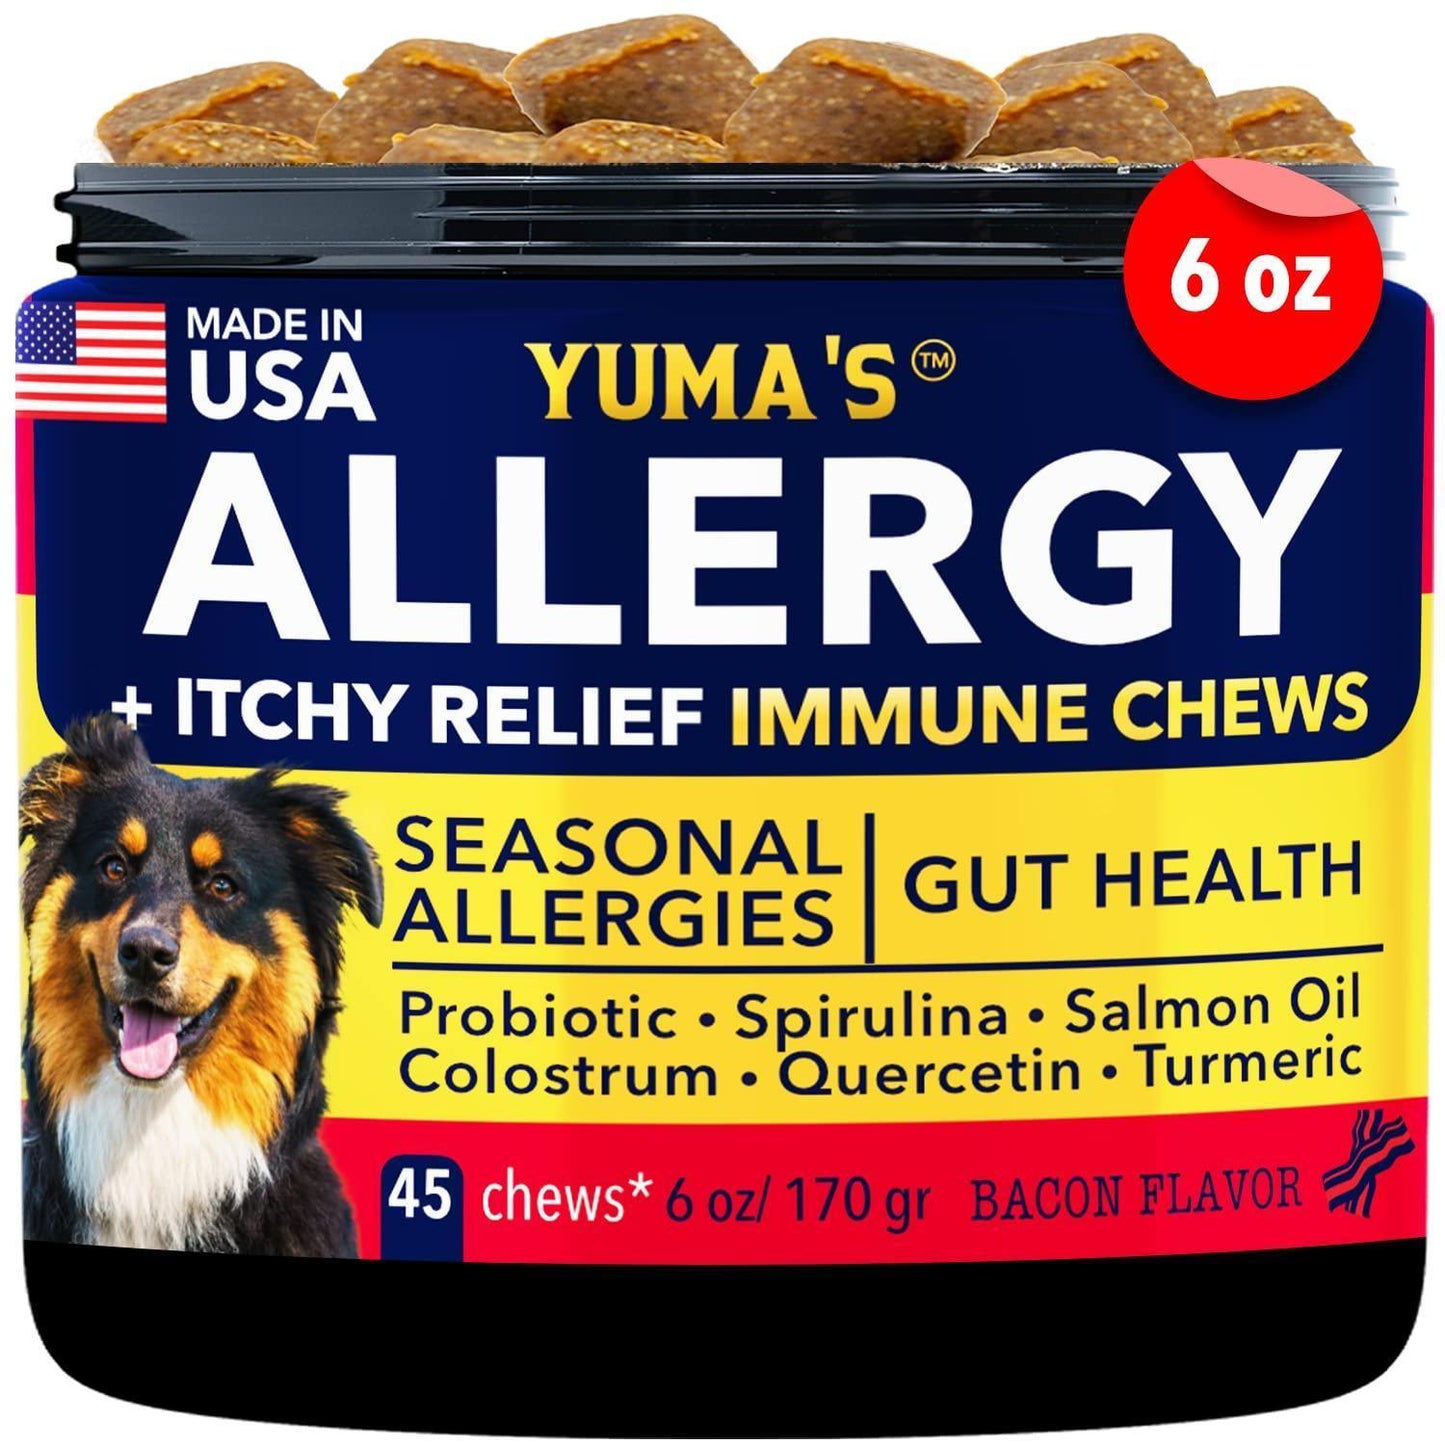 Dog Allergy Chews Itch Relief for Dogs Dog Allergy Relief Anti Itch for Dogs Dog Itchy Skin  6 oz